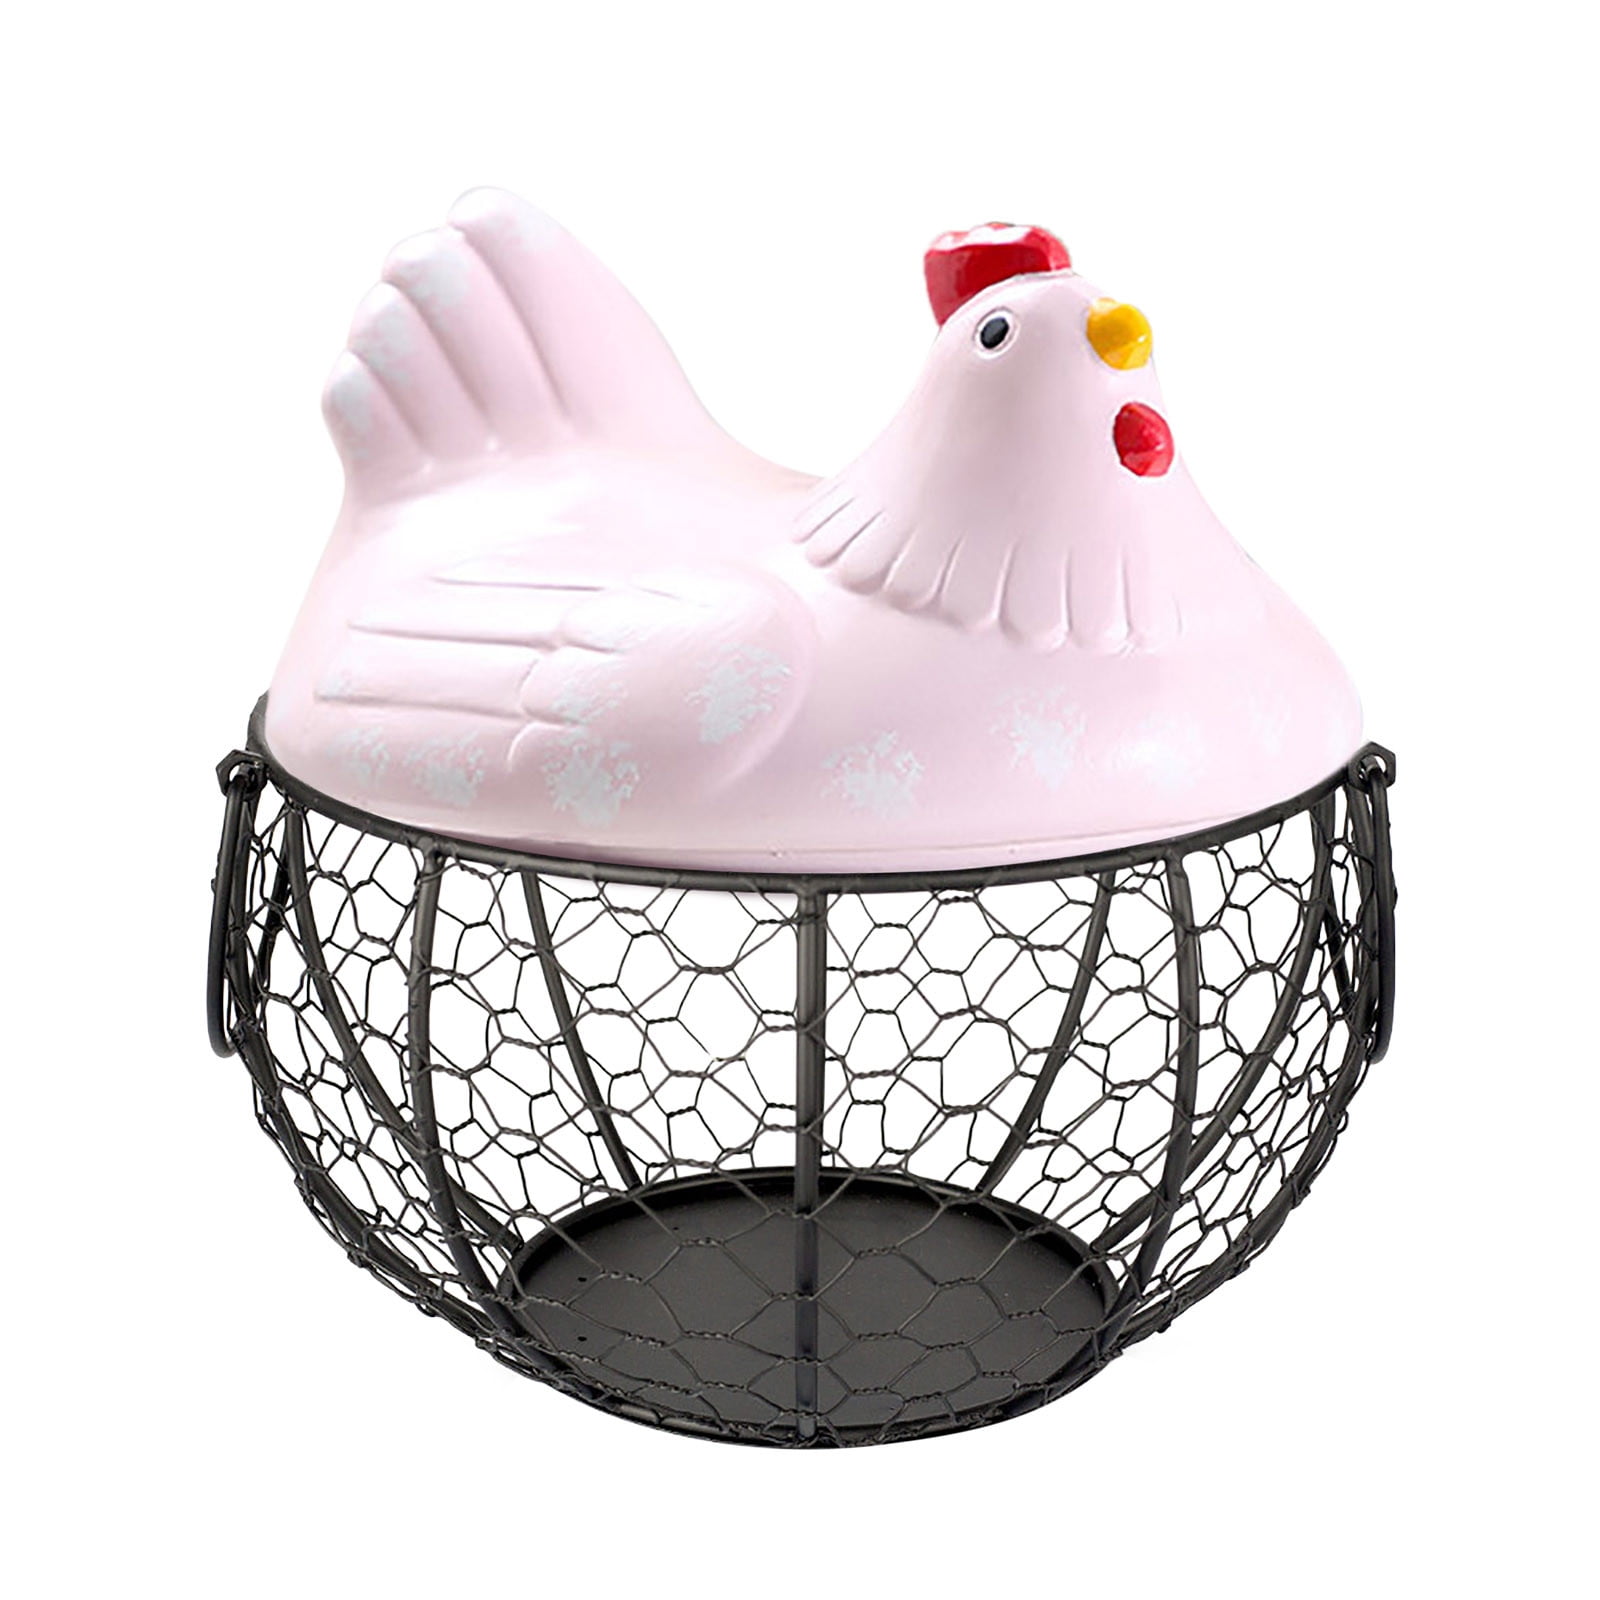  TAIANLE Farmhouse Metal Wire Egg Basket for Collecting Fresh  Eggs,Round Handle Egg Basket Vintage Style,Durable Collect & Gathering  Basket for Fresh Egg,Countertop Egg Basket Holder,Storage Fruit Bin : Home  & Kitchen